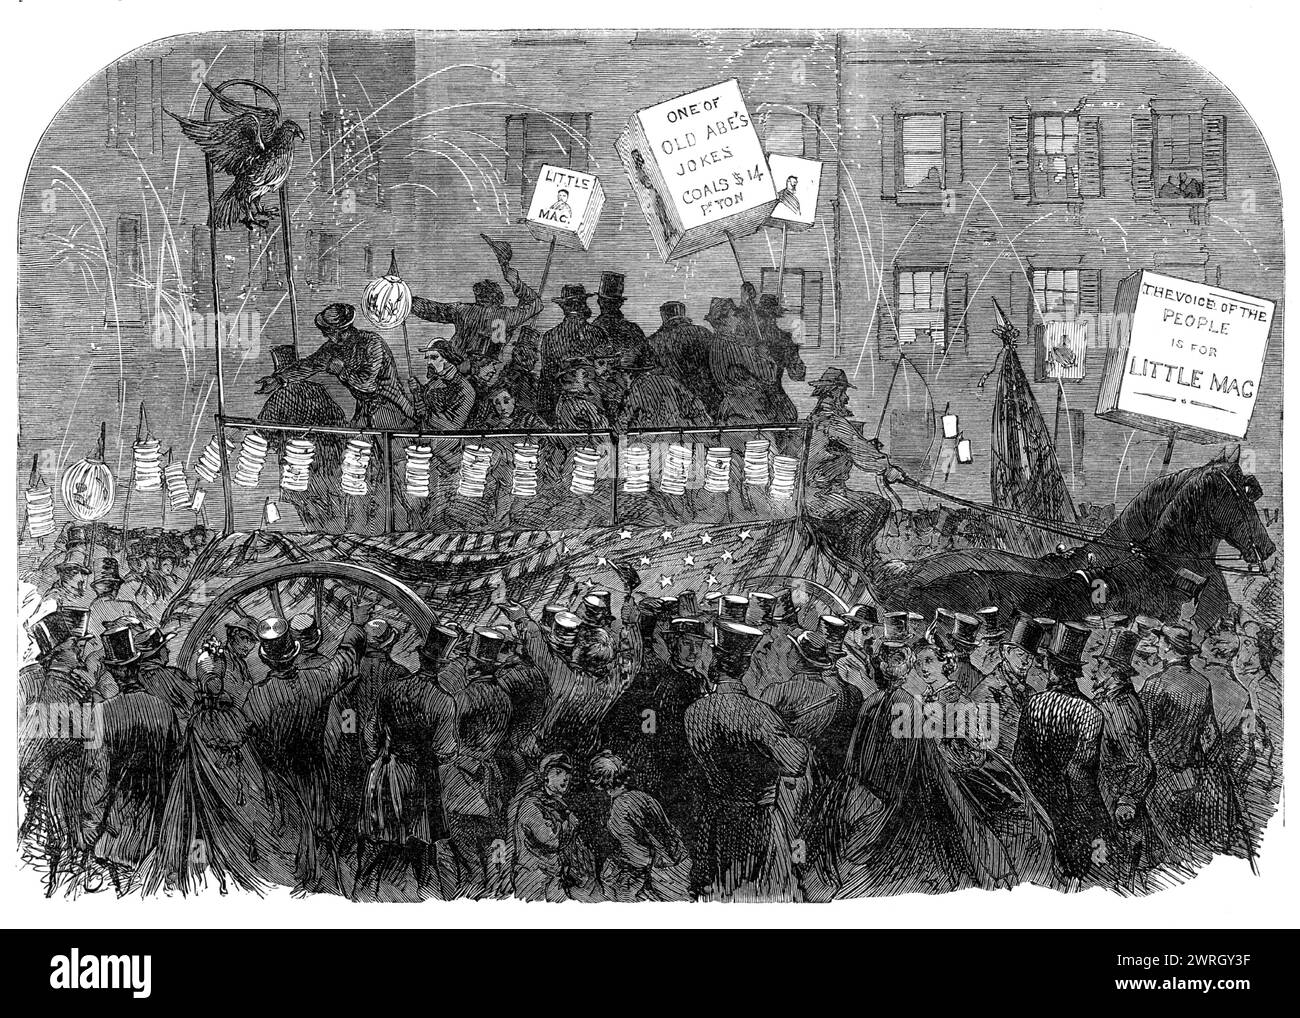 Presidential electioneering in New York: torchlight procession of the M'Clellan party, 1864. Engraving of a sketch by Mr. C. D. Shanly. '...there was another tremendous demonstration here in favour of M'Clellan and Pendleton for the presidency and vice-presidency of the United States, respectively...There was an endless torchlight procession of the M'Clellanites belonging to the several wards of the city; and the torches, every now and then, discharged globes of fire and showers of sparks into the air. All was a blaze of many-coloured light...Conspicuous in the procession were a number of larg Stock Photo